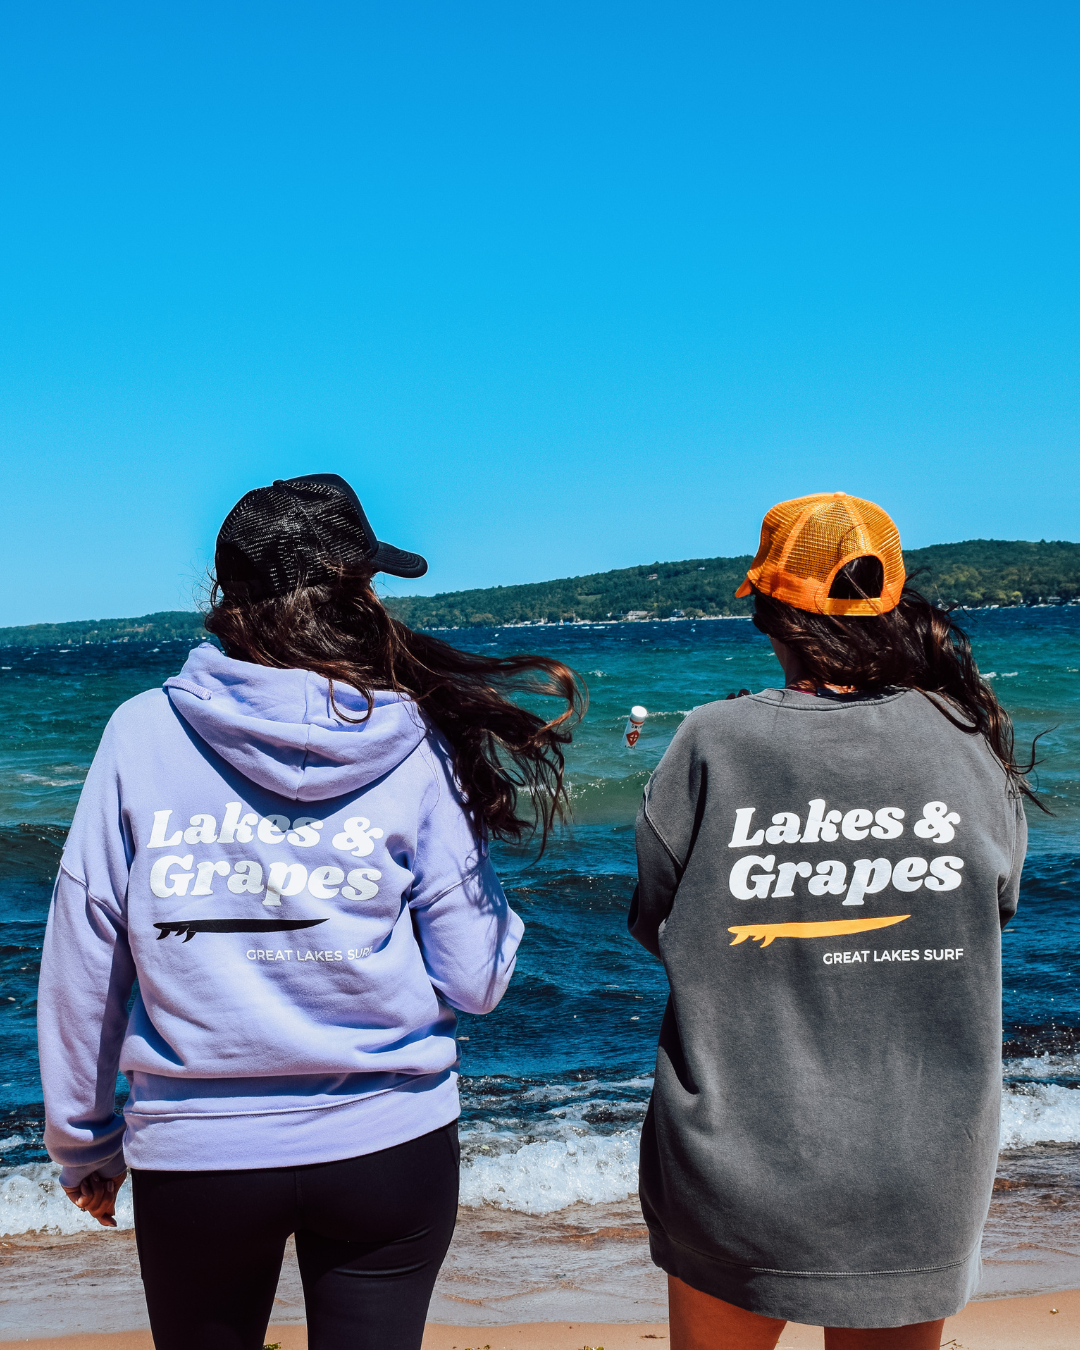 In this image, we see a Lakes and Grapes Great Lakes Surf Trucker Hat. Experience comfort and style as you embrace the spirit of the Great Lakes.